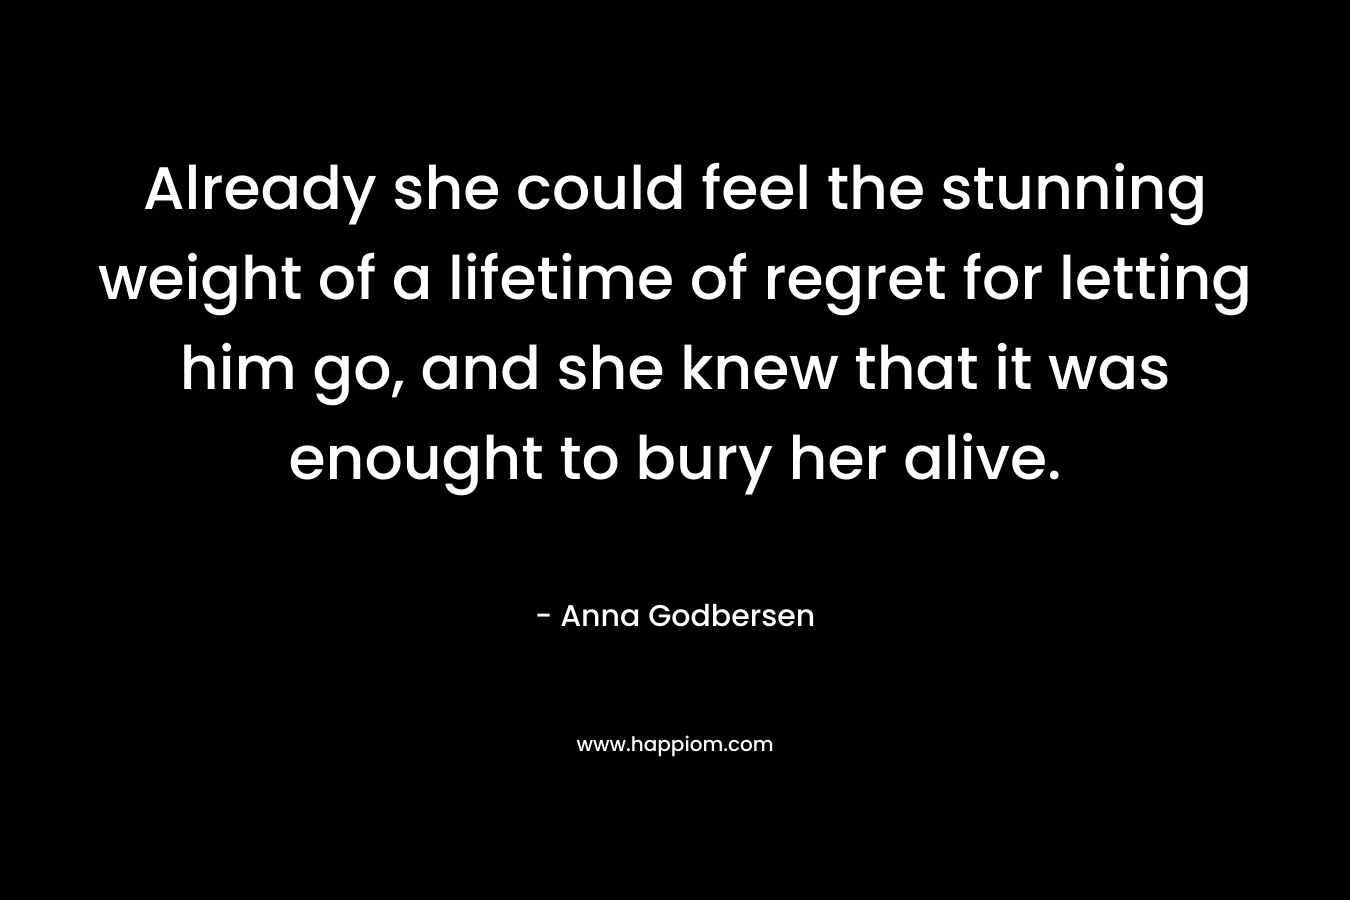 Already she could feel the stunning weight of a lifetime of regret for letting him go, and she knew that it was enought to bury her alive. – Anna Godbersen